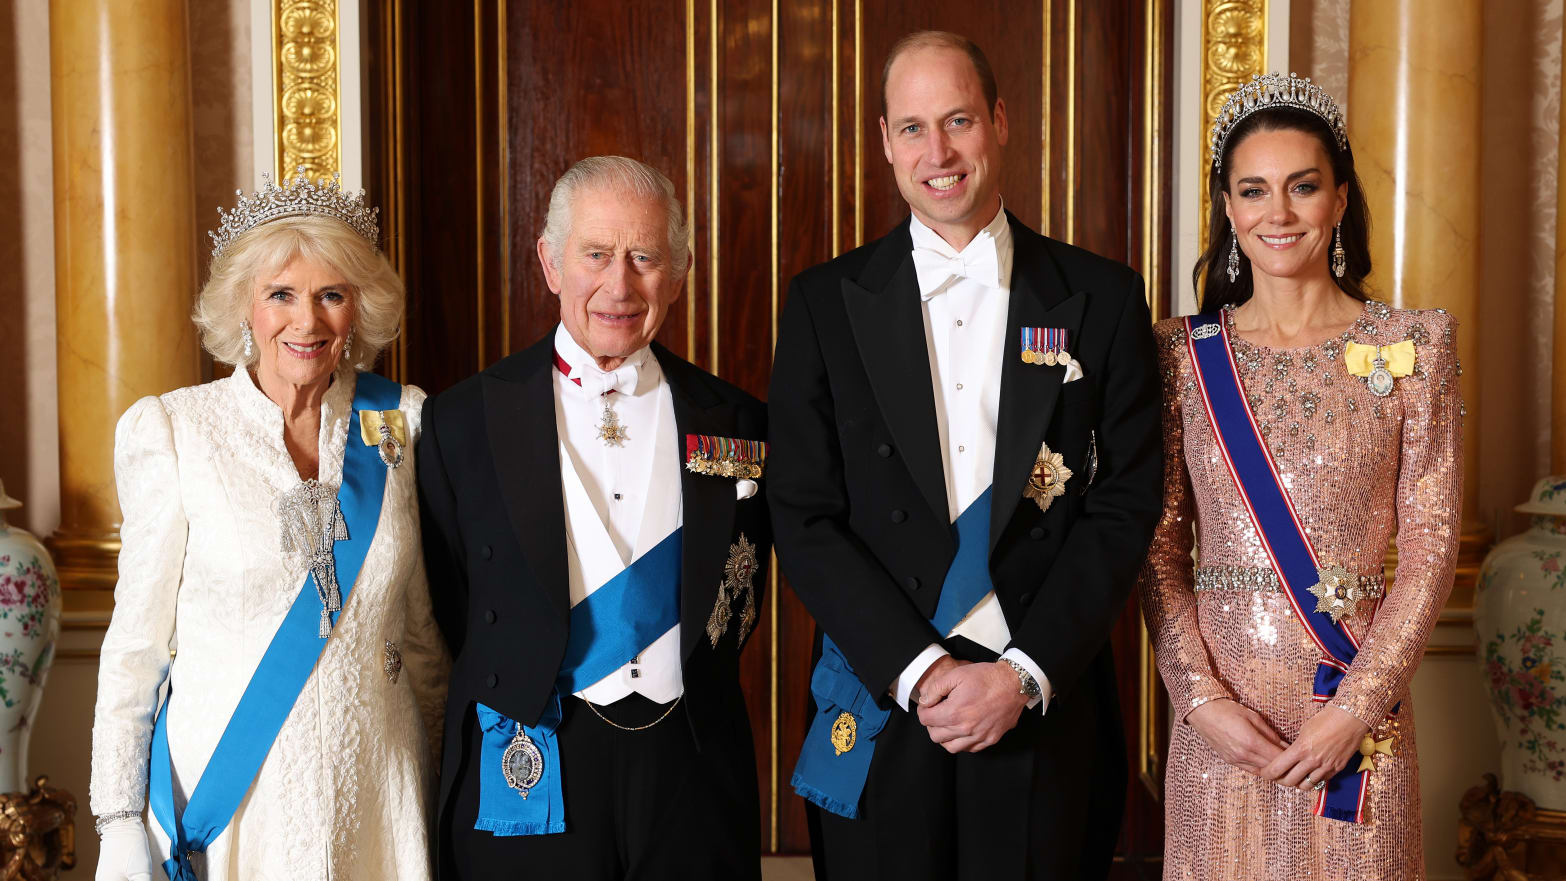 Queen Camilla, King Charles III, Prince William, Prince of Wales and Catherine, Princess of Wales pose for a photograph ahead of the Diplomatic Reception in the 1844 Room at Buckingham Palace. 